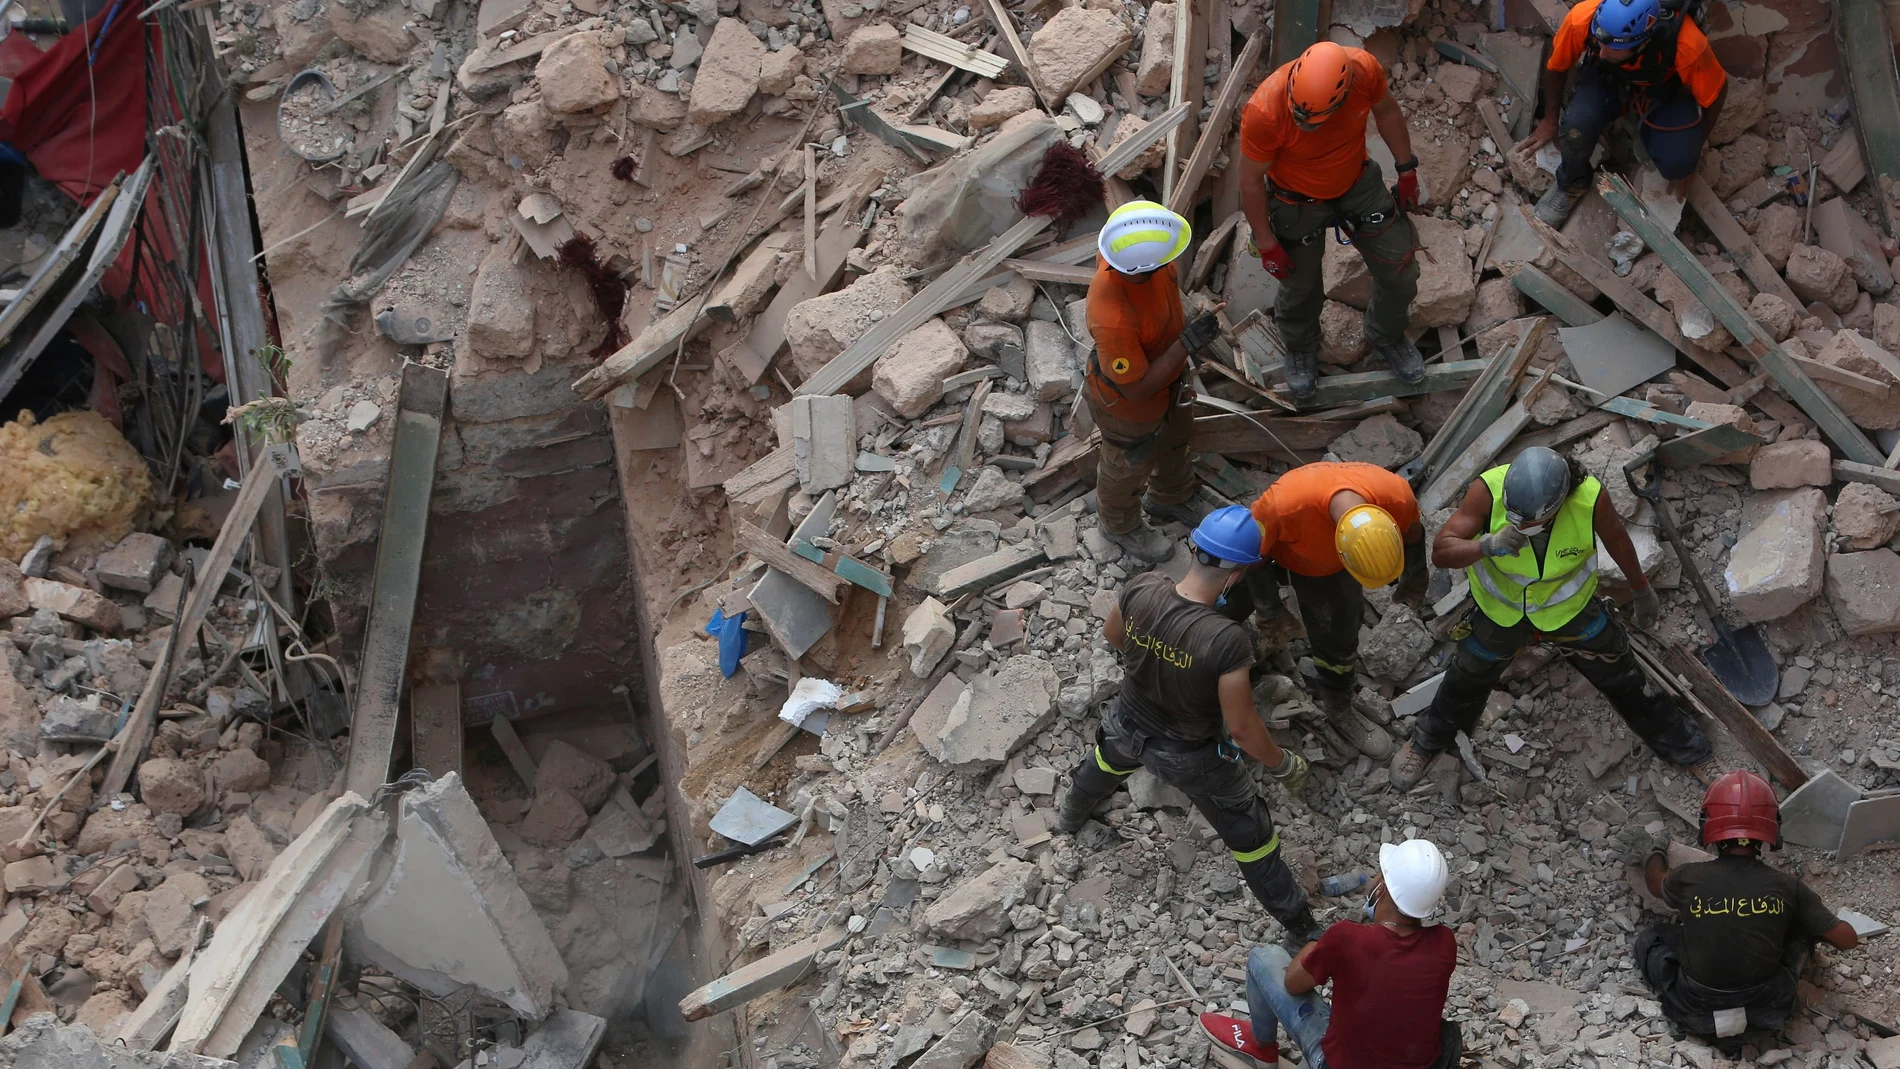 Rescue team search through rubble of buildings damaged due to the massive explosion at Beirut's port area